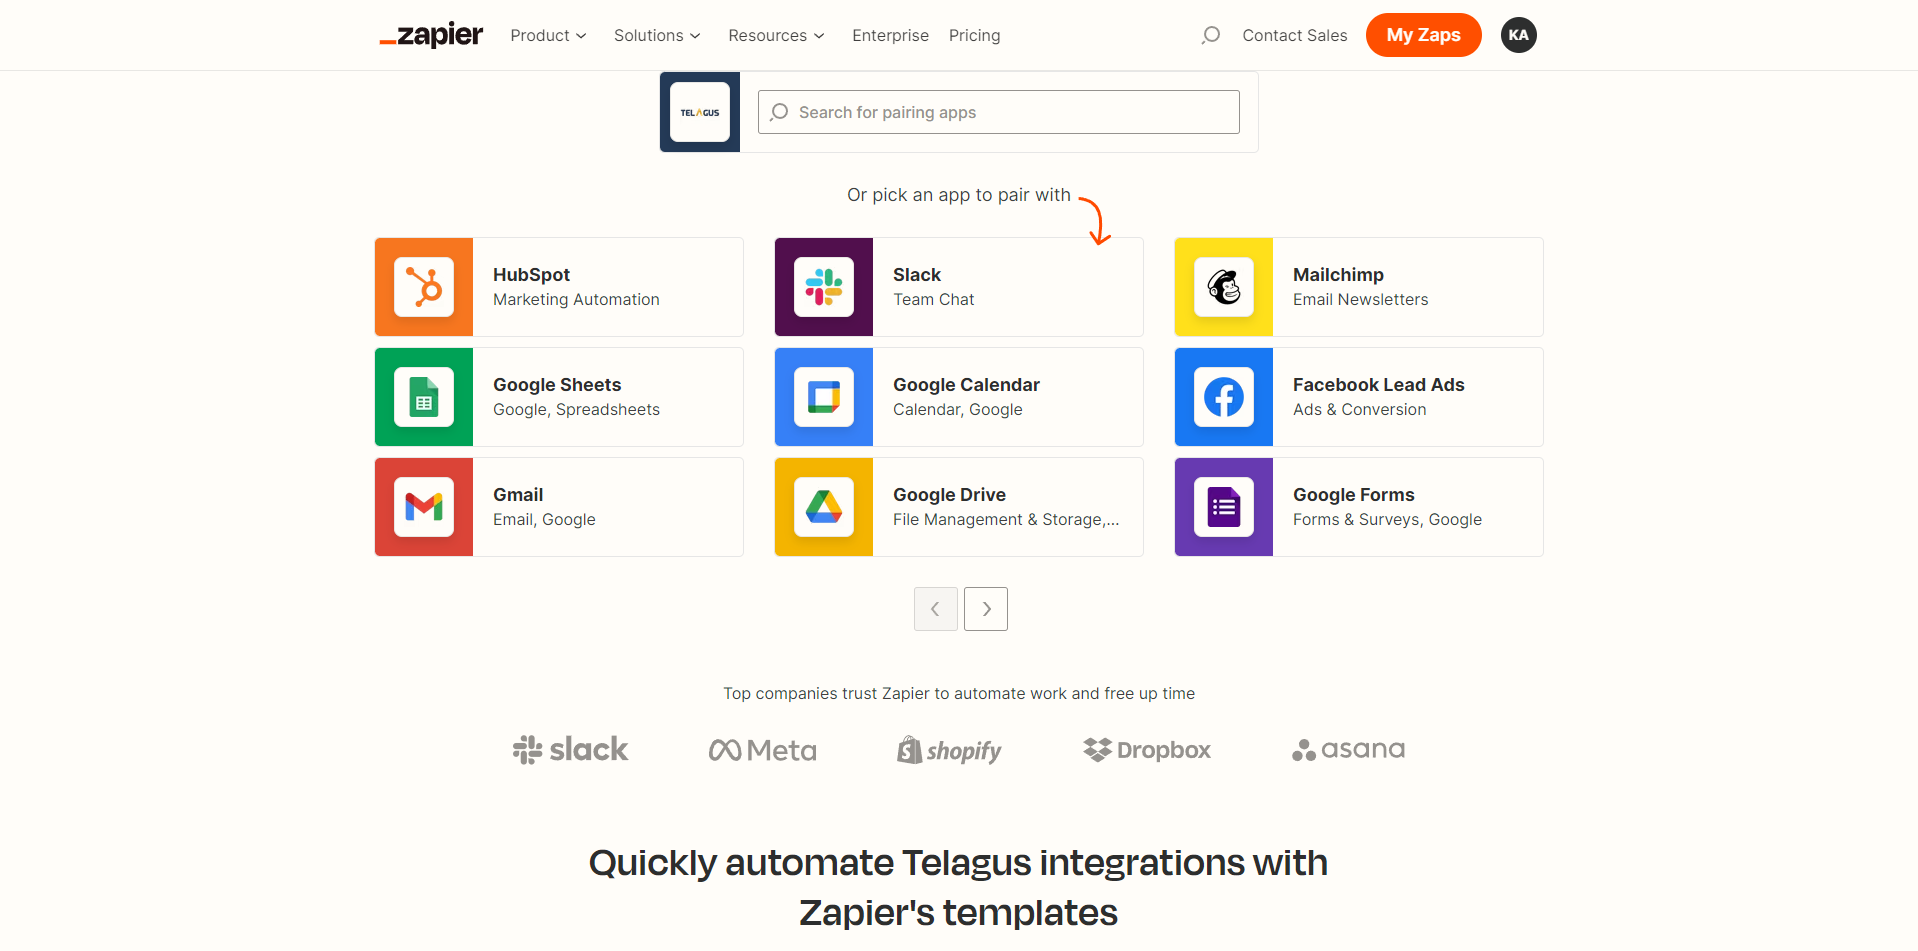 Blog - Streamline Your Business with Telagus CRM and Zapier Integration